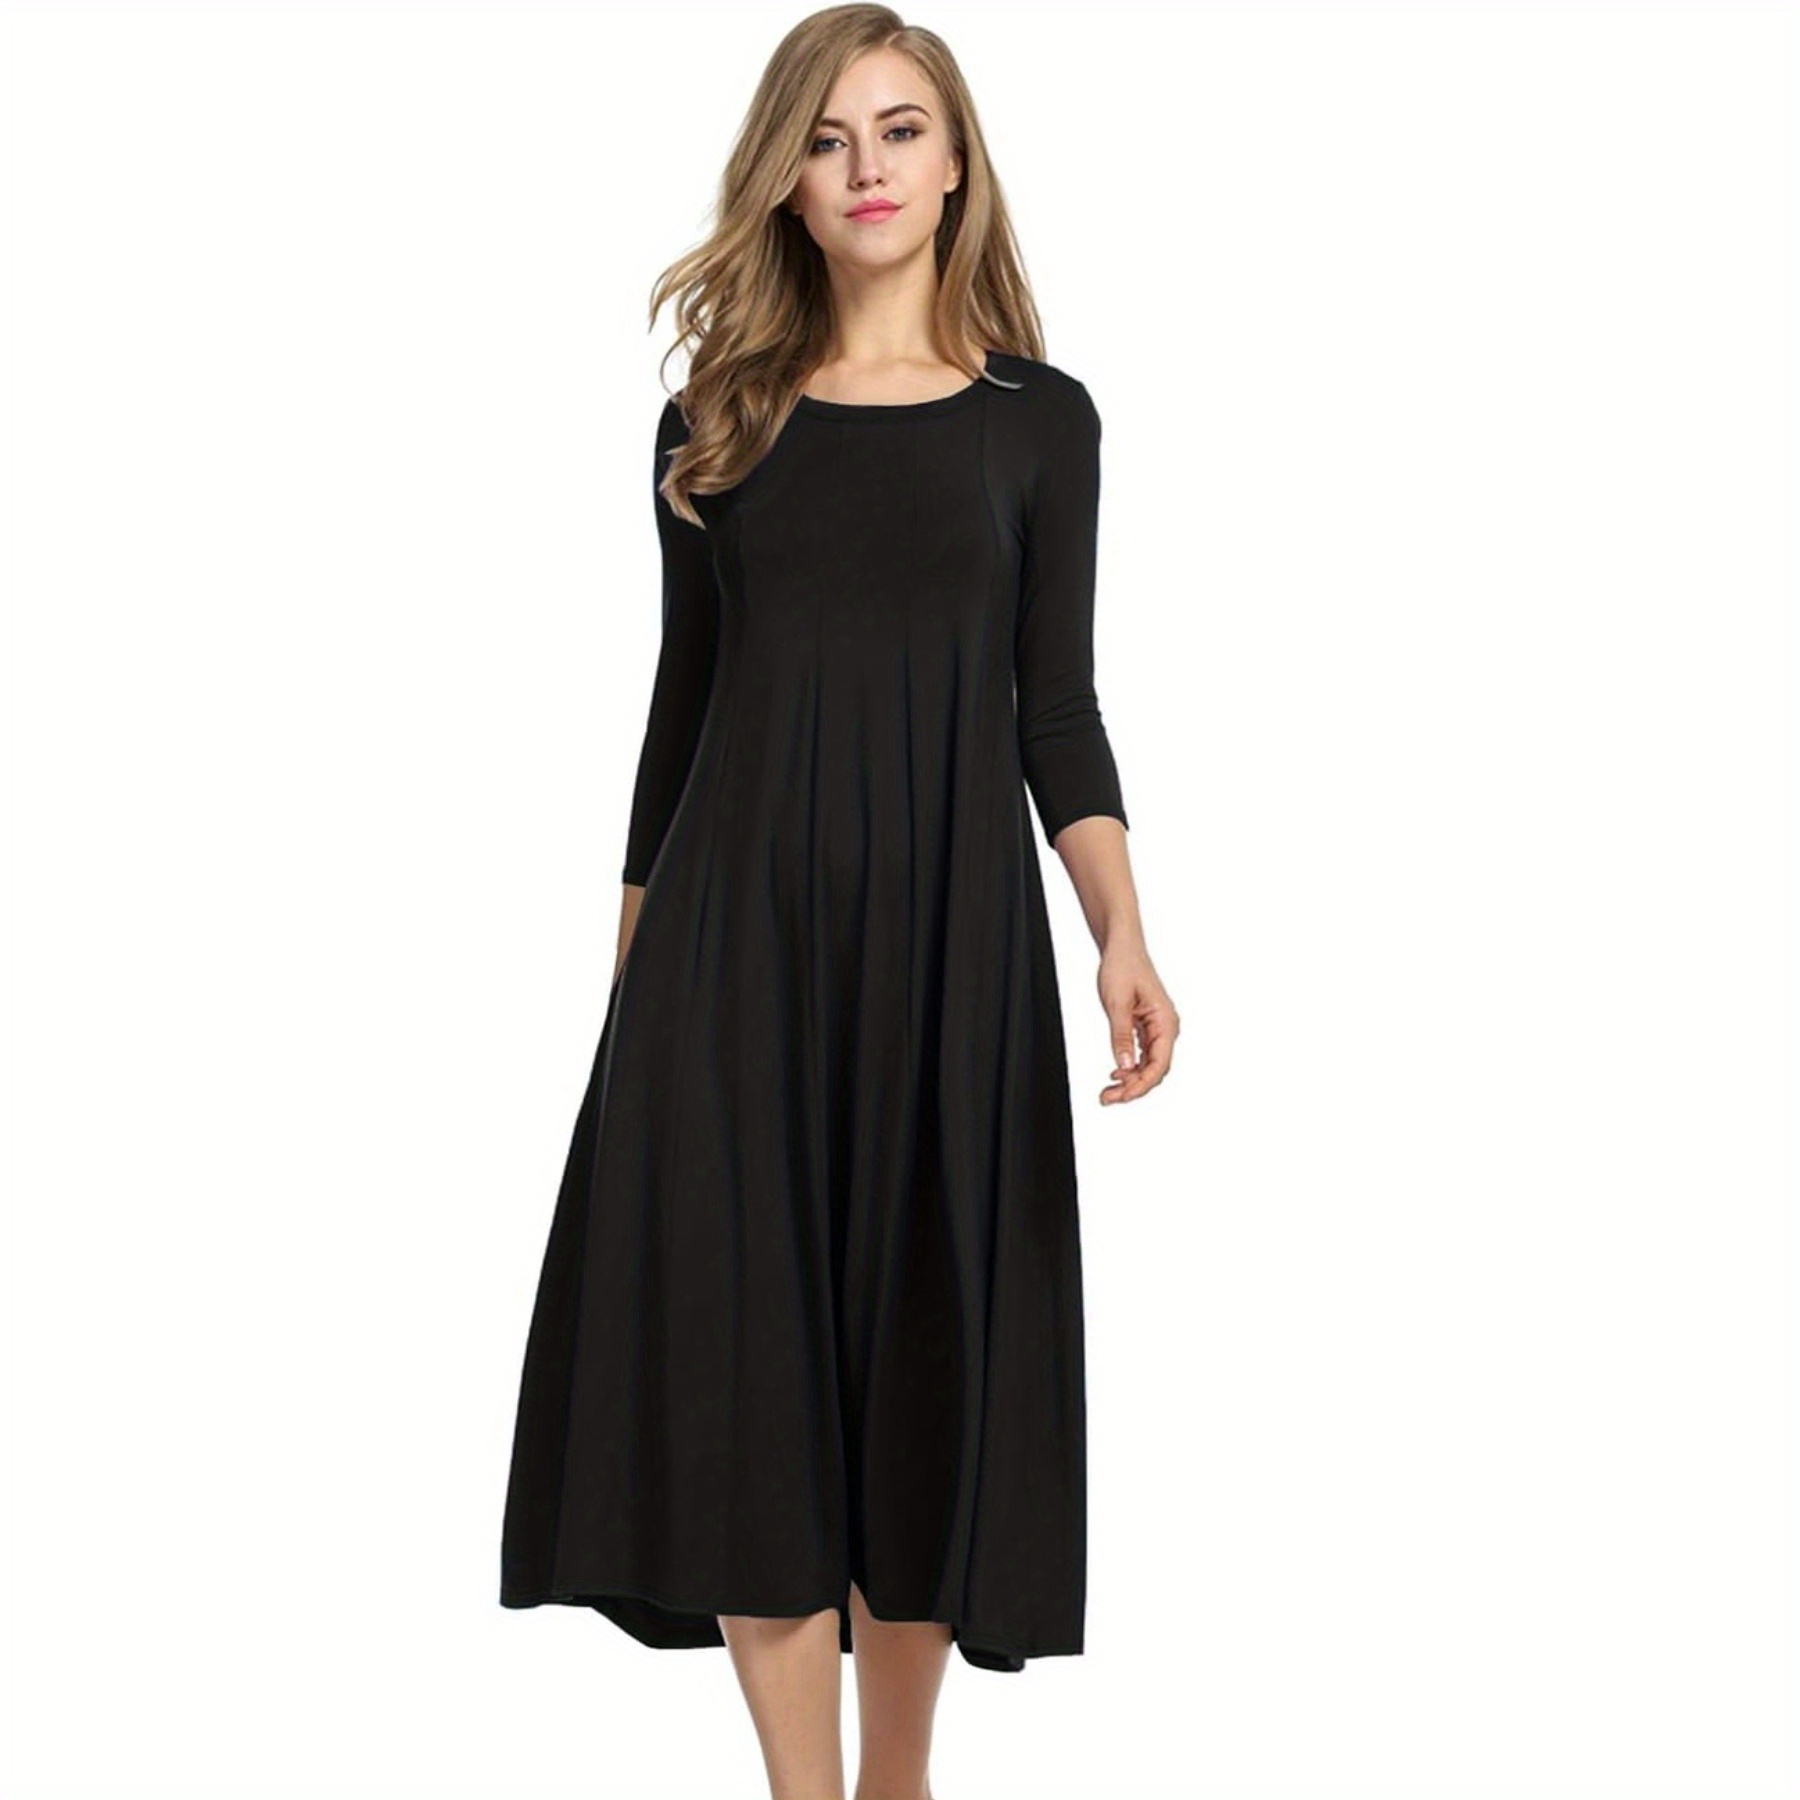 

Crew Neck A Line Midi Dress, Casual 3/4 Sleeve Loose Dress For Spring & Fall, Women's Clothing